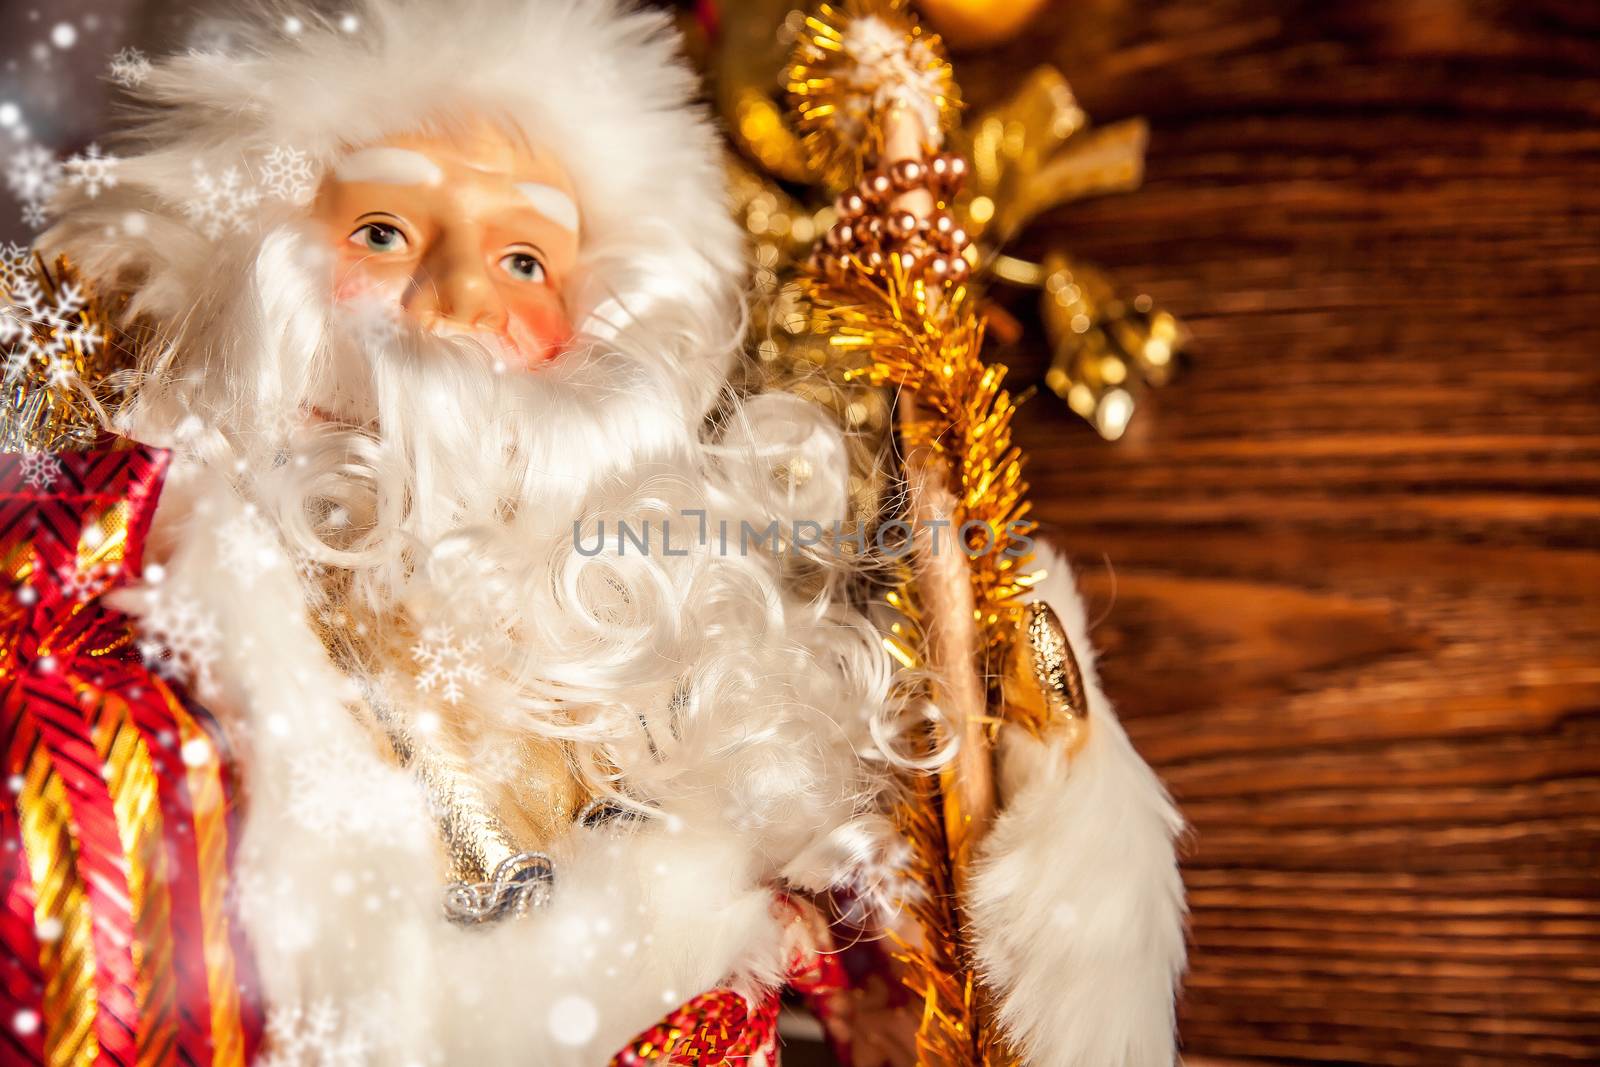 Father Frost (Russian Ded Moroz) figurine on traditional 2019 by mi_viri